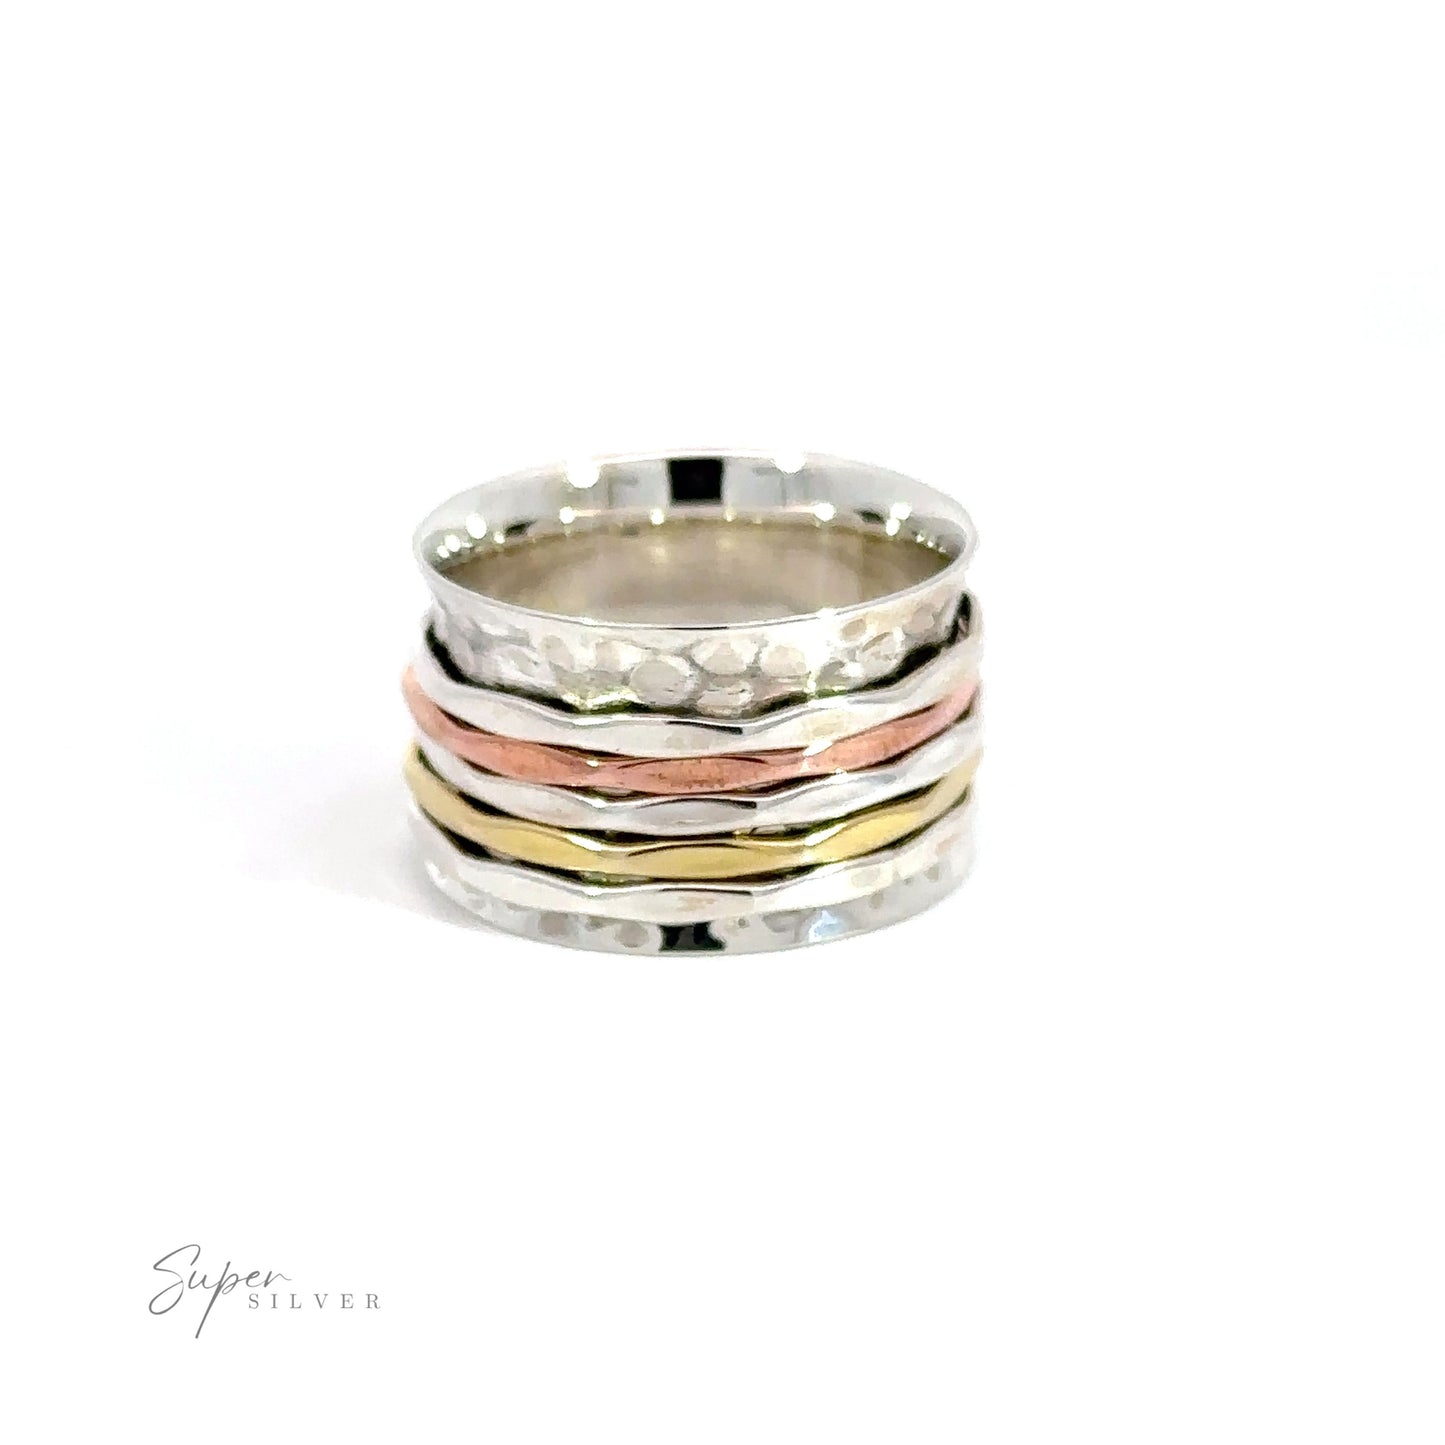 A Handmade Hammered Tricolor Spinner Ring featuring a mixed metal piece of sterling silver, gold, and copper.